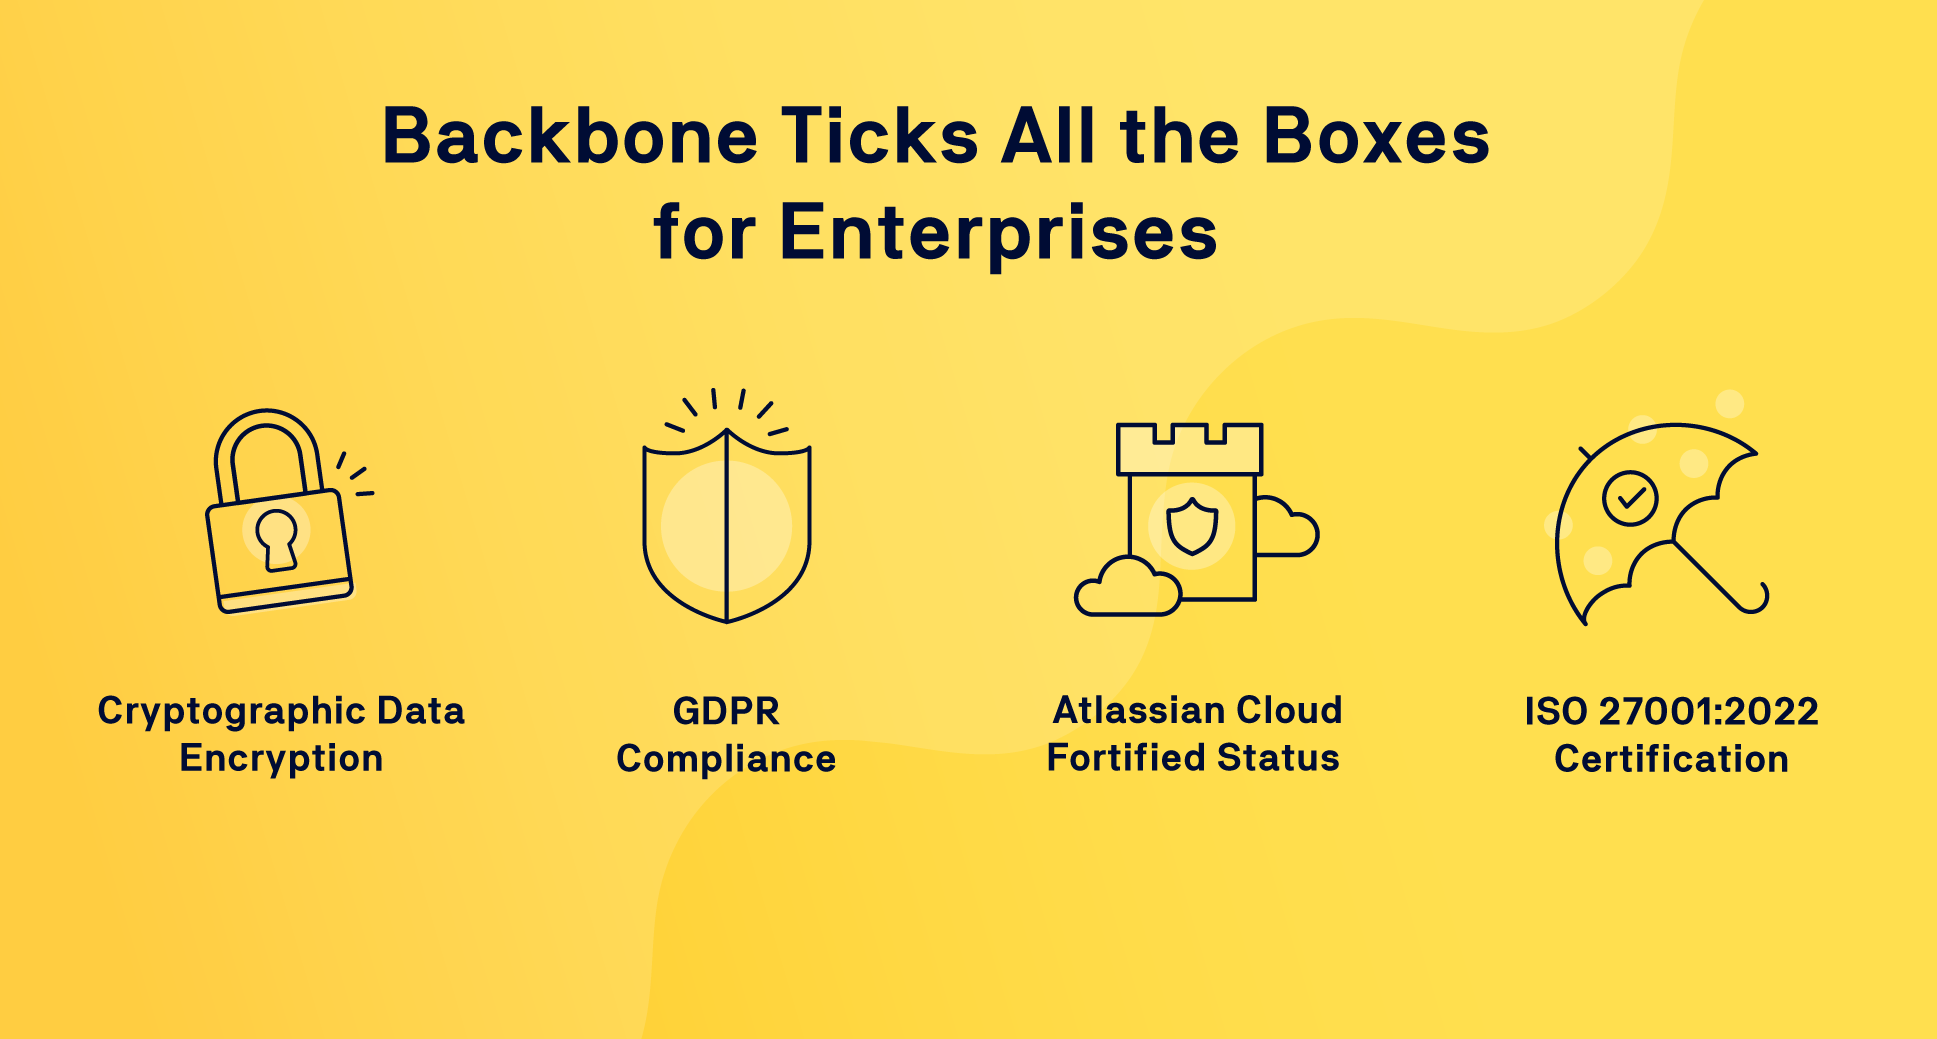 Why Backbone is a perfect fit for enterprises